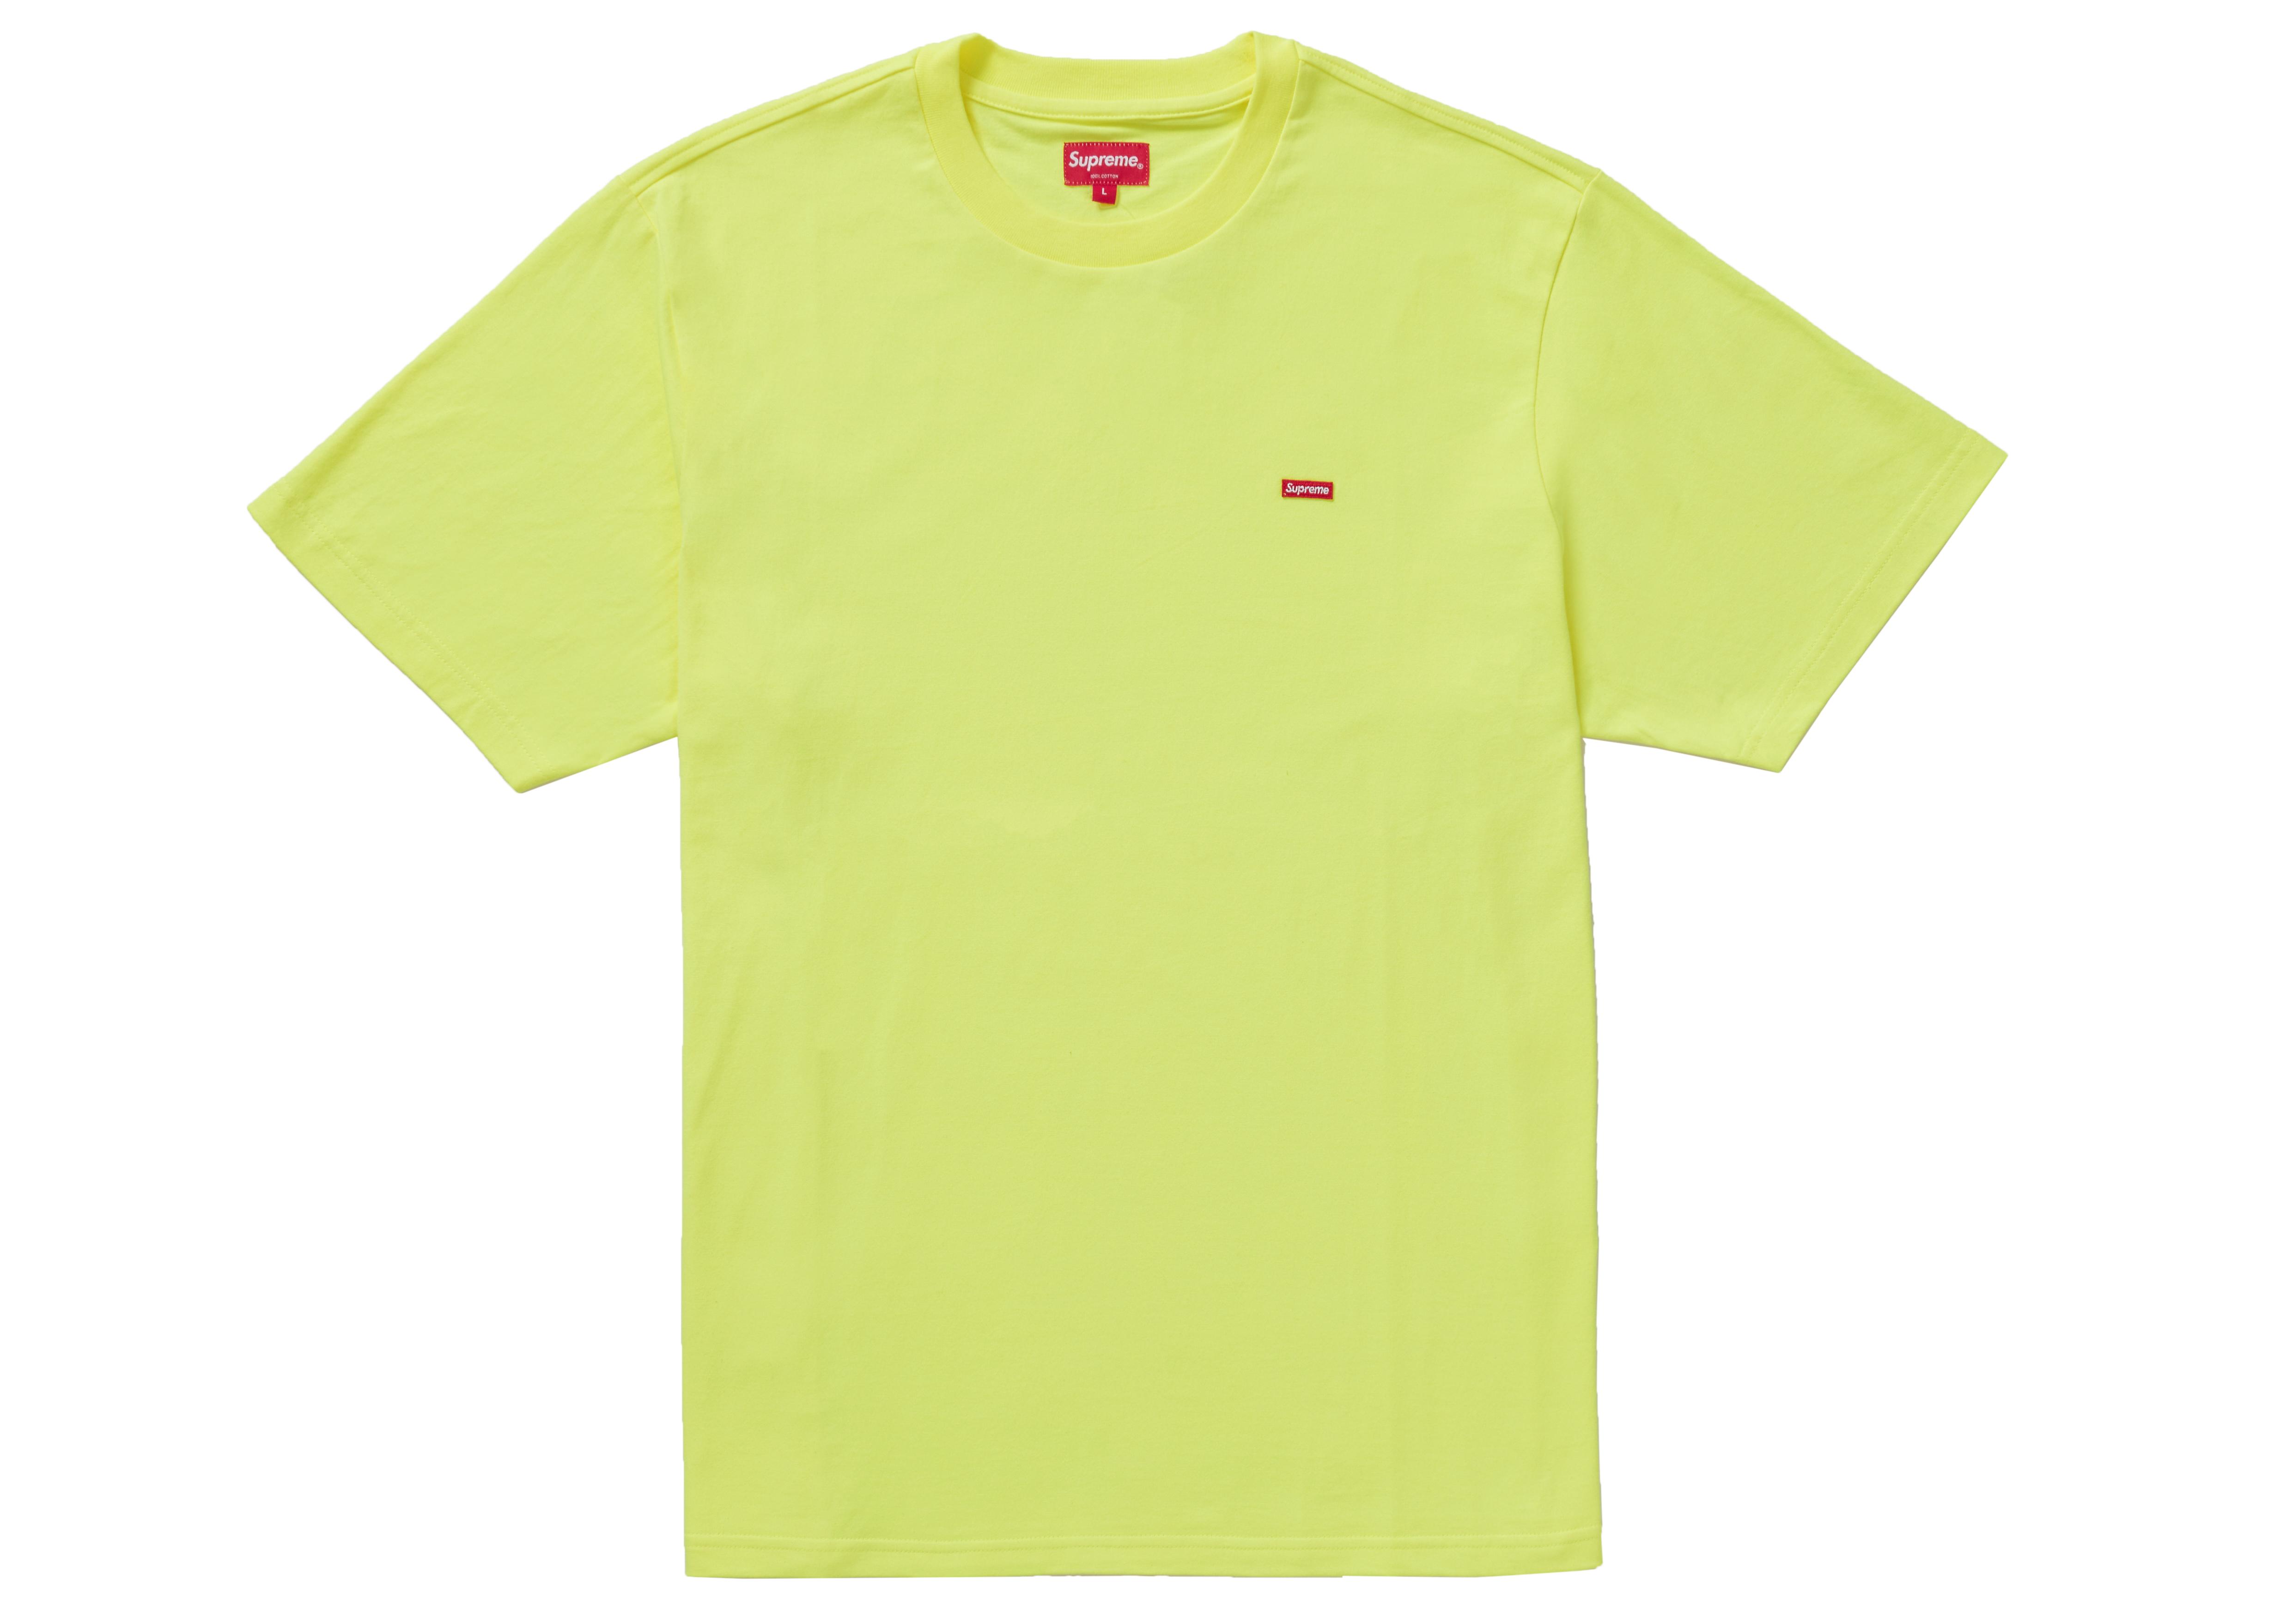 Supreme Small Box Tee (fw20) in Yellow for Men - Lyst